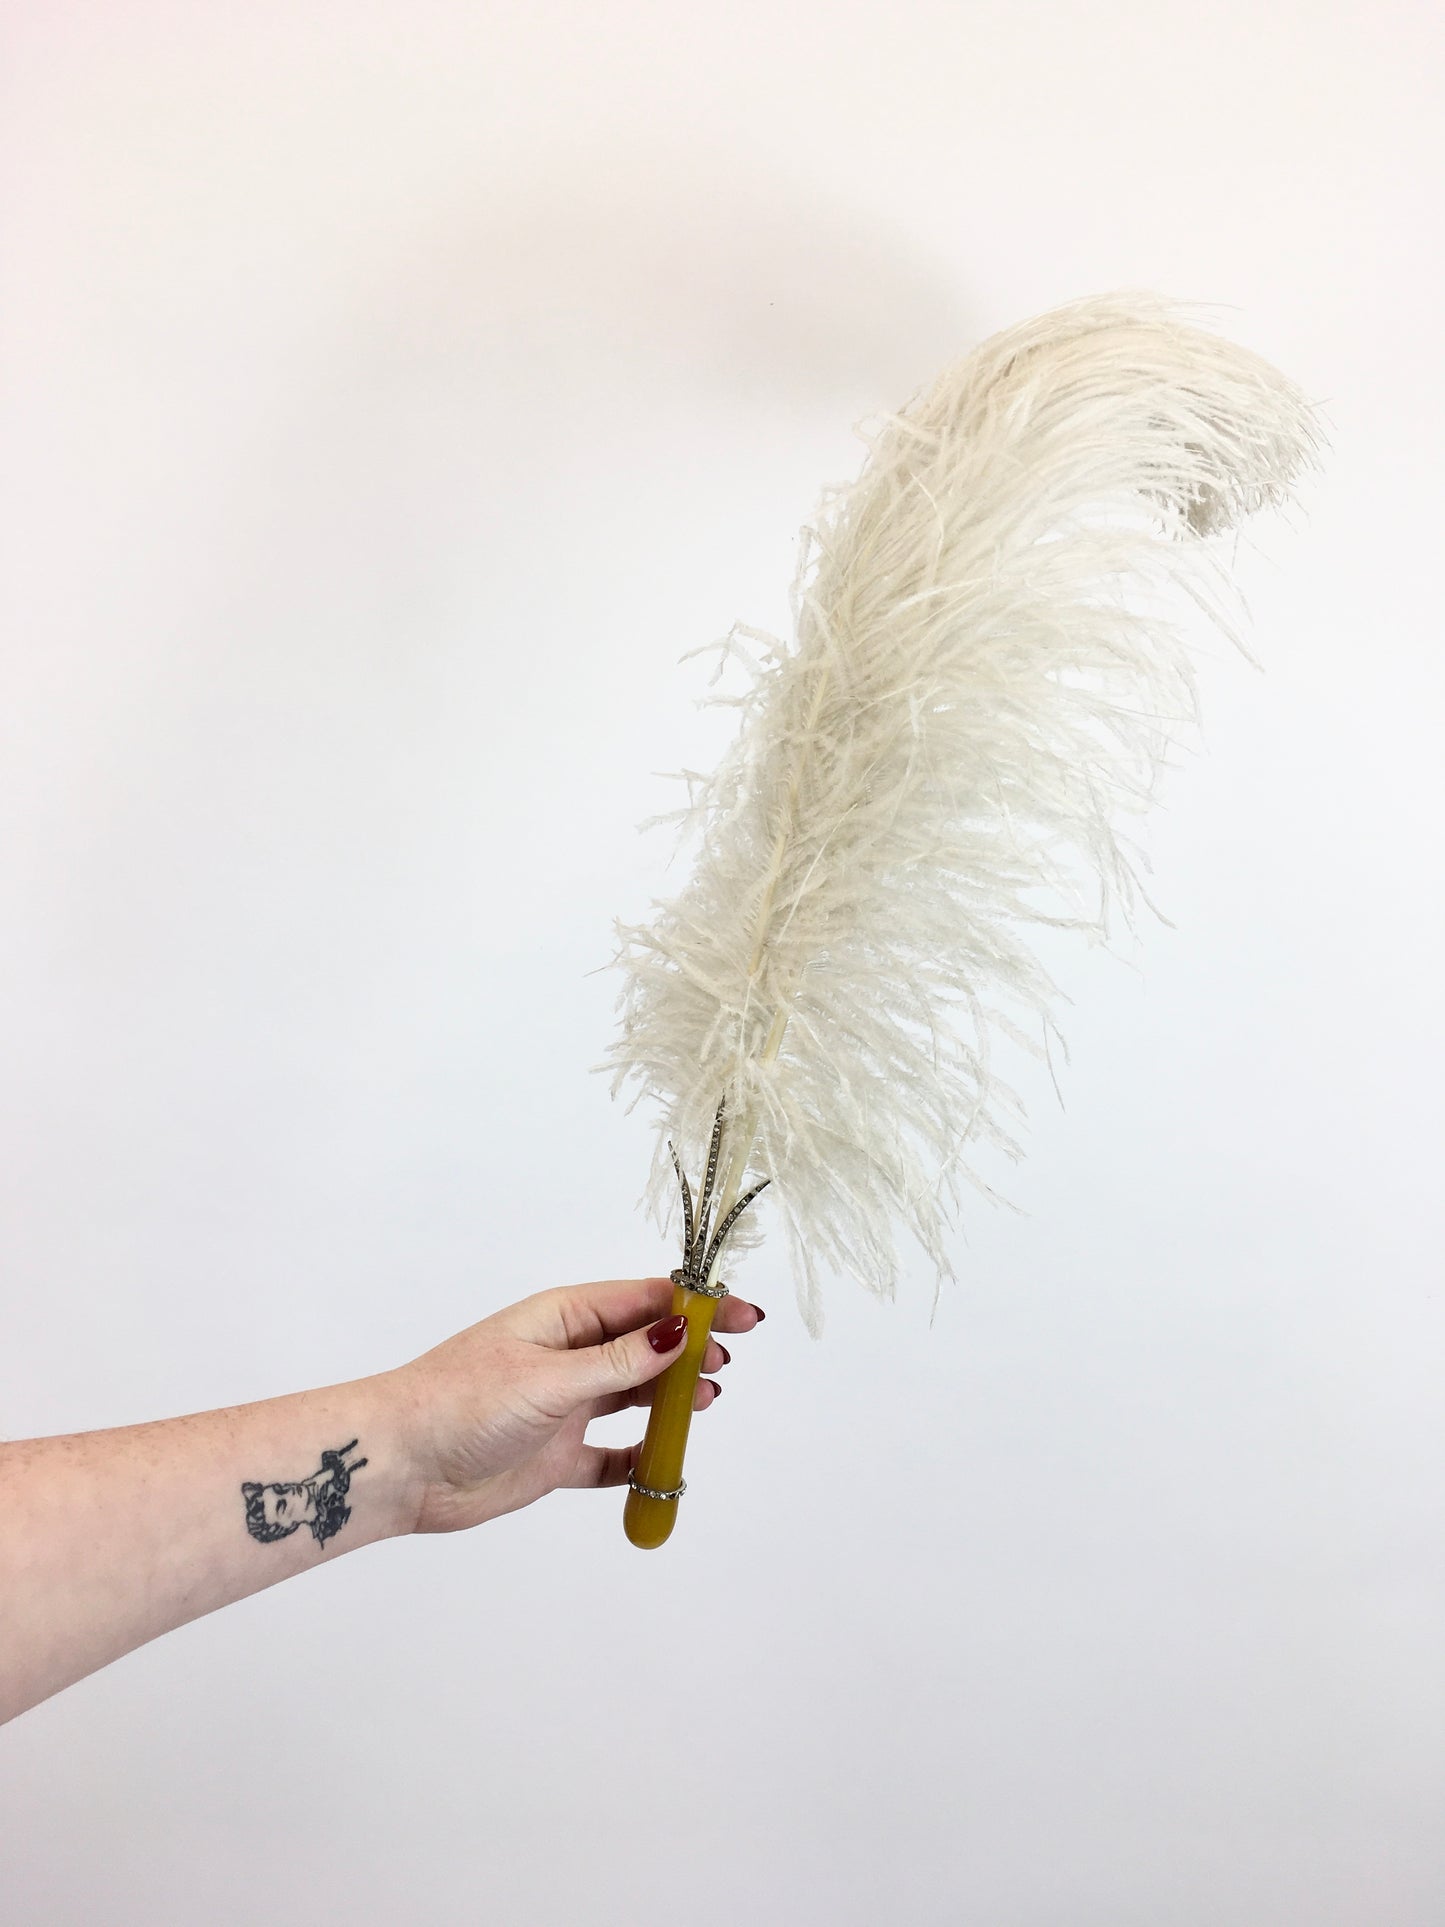 Original 1920's Fabulous Single Feather Plume with Encrusted Early Plastic Handle - Worn in 1926 To a Brides Evening Celebration